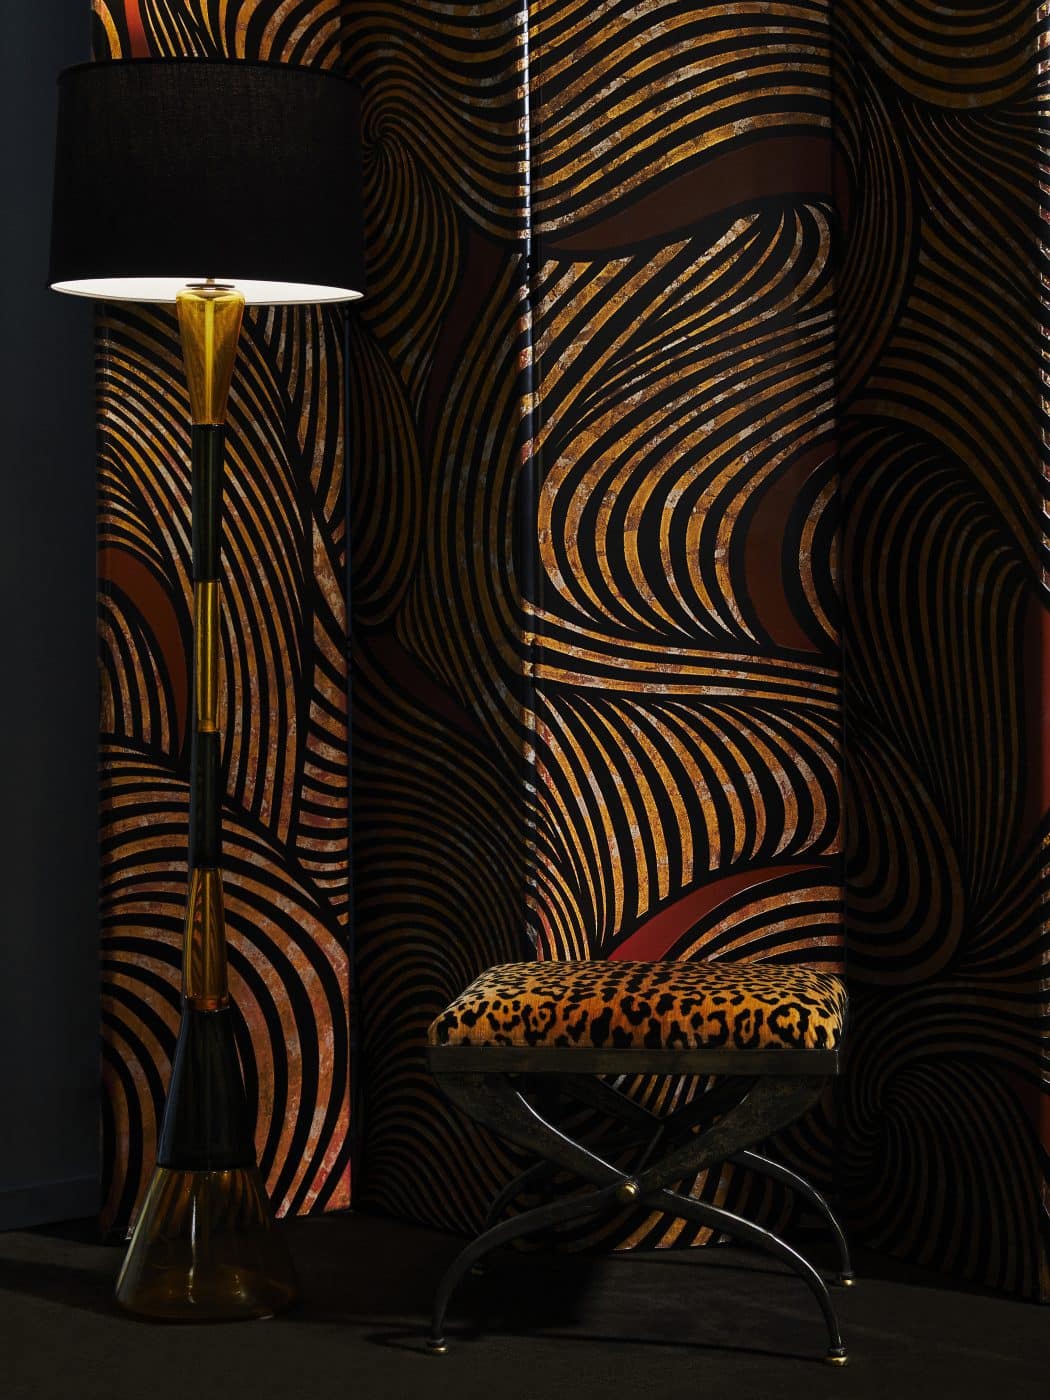 Springer's 1986 lacquer Coromandel screen makes an ideal backdrop for a circa 1960 hand-blown-glass Venini floor lamp and a 1970s leopard-print bench.